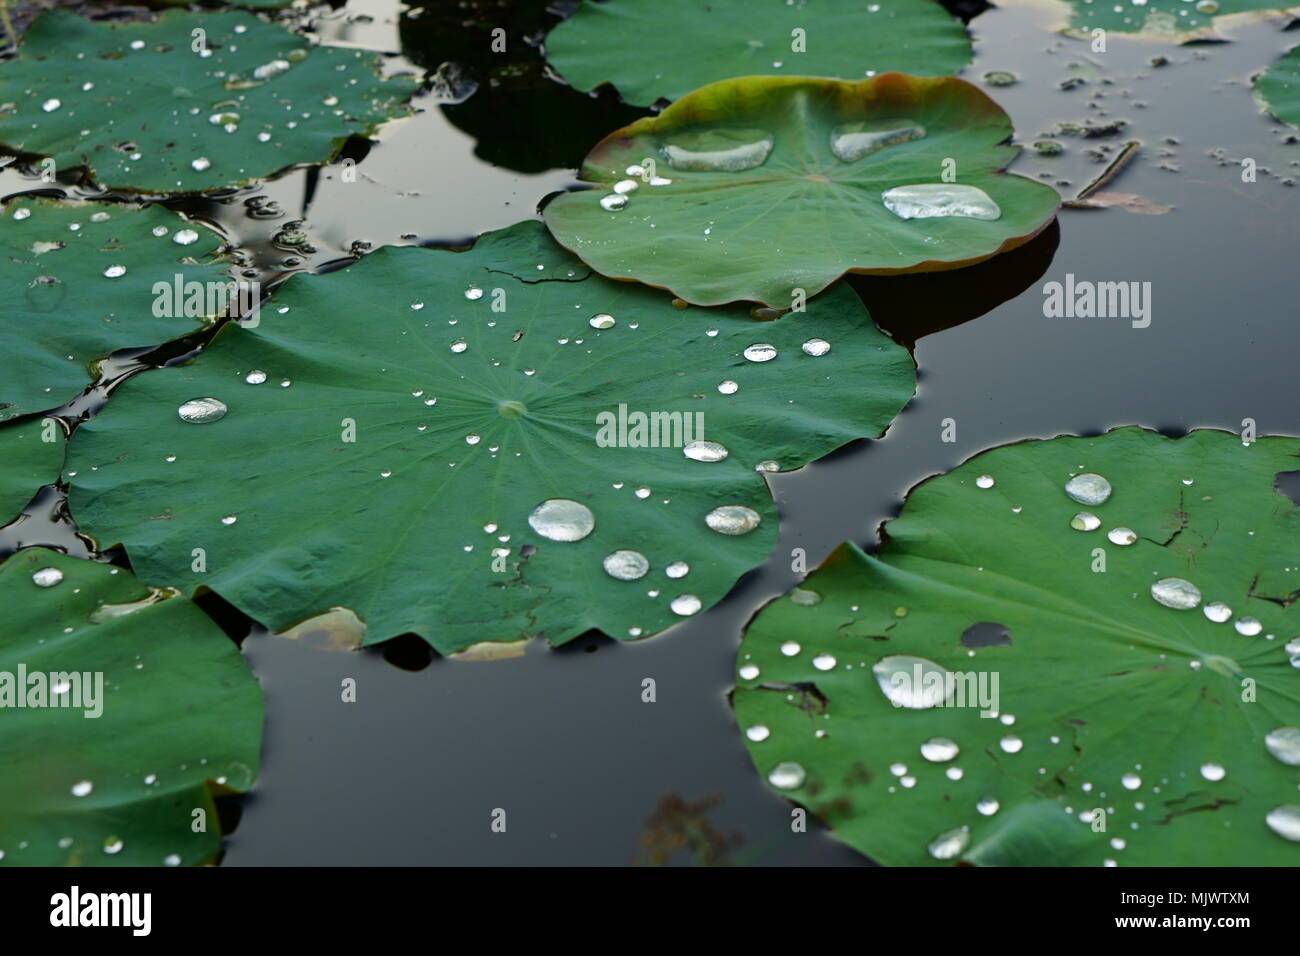 Lotus leaf with water droplets on them Stock Photo